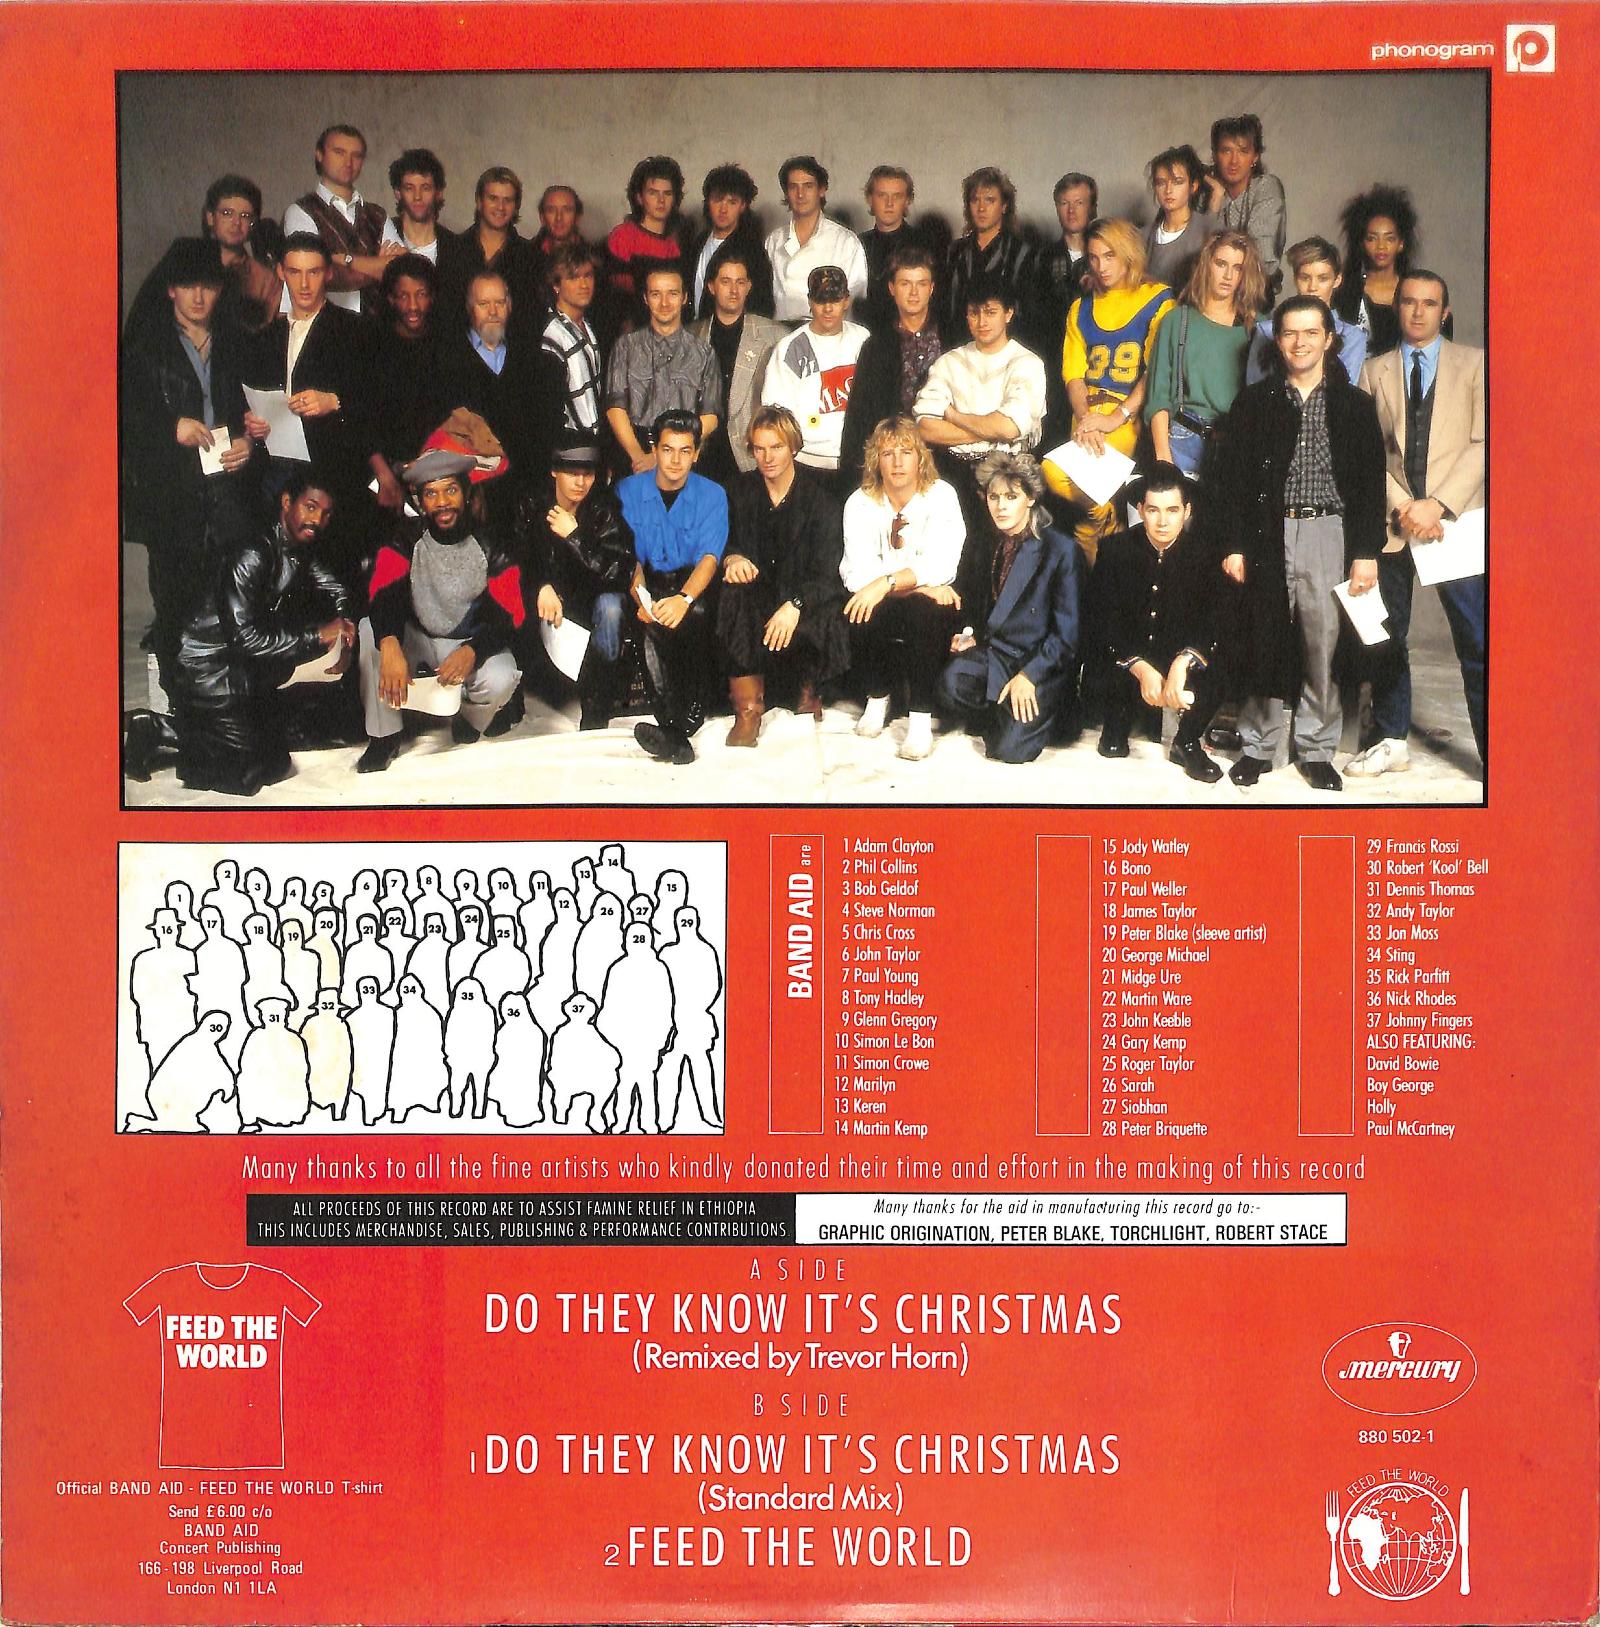 BAND AID - Do They Know It's Christmas?